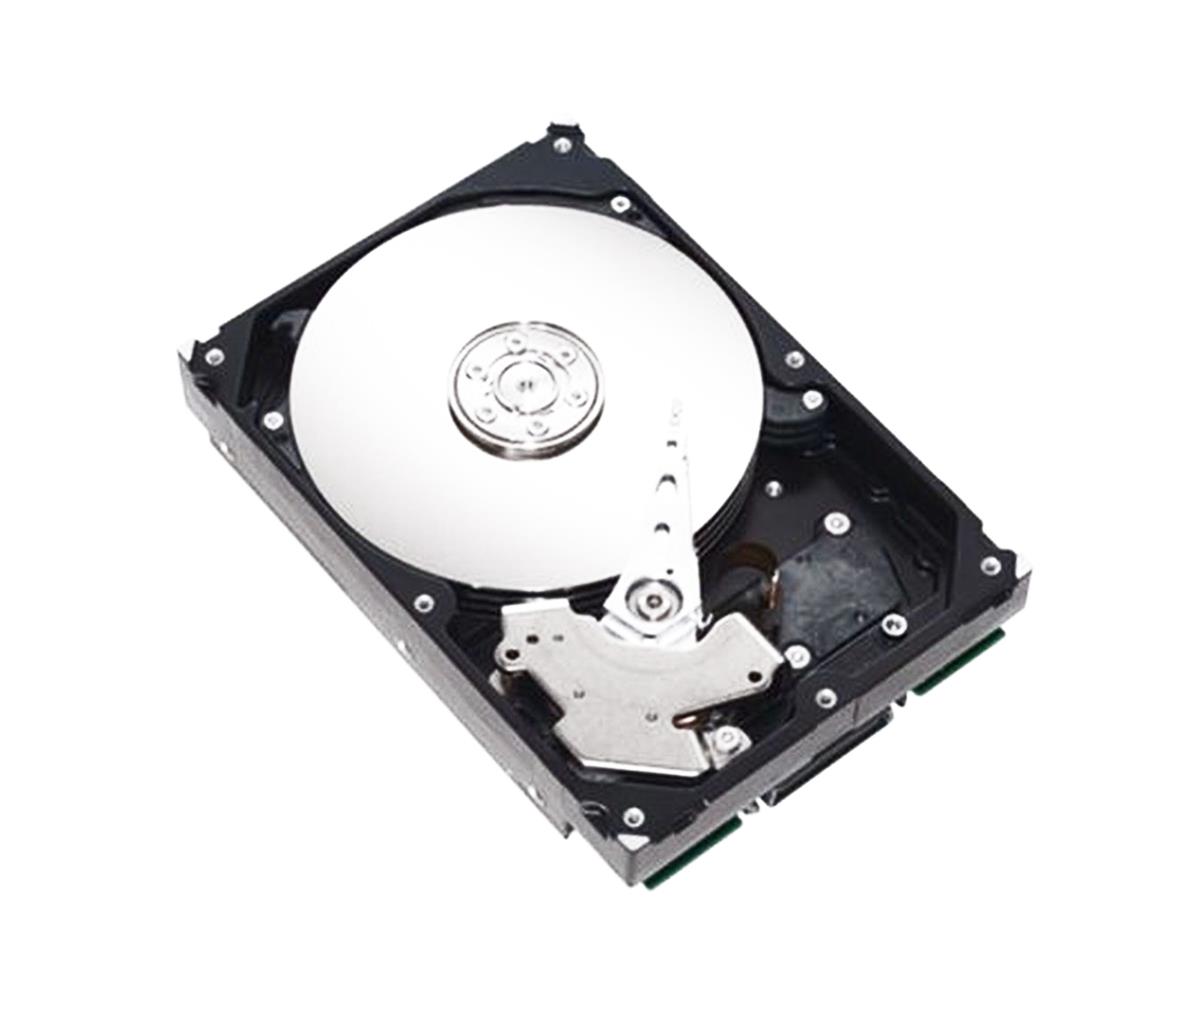 9Y8204-001 Seagate NL35 Series 500GB 7200RPM Fibre Channel 2Gbps 8MB Cache 3.5-inch Internal Hard Drive